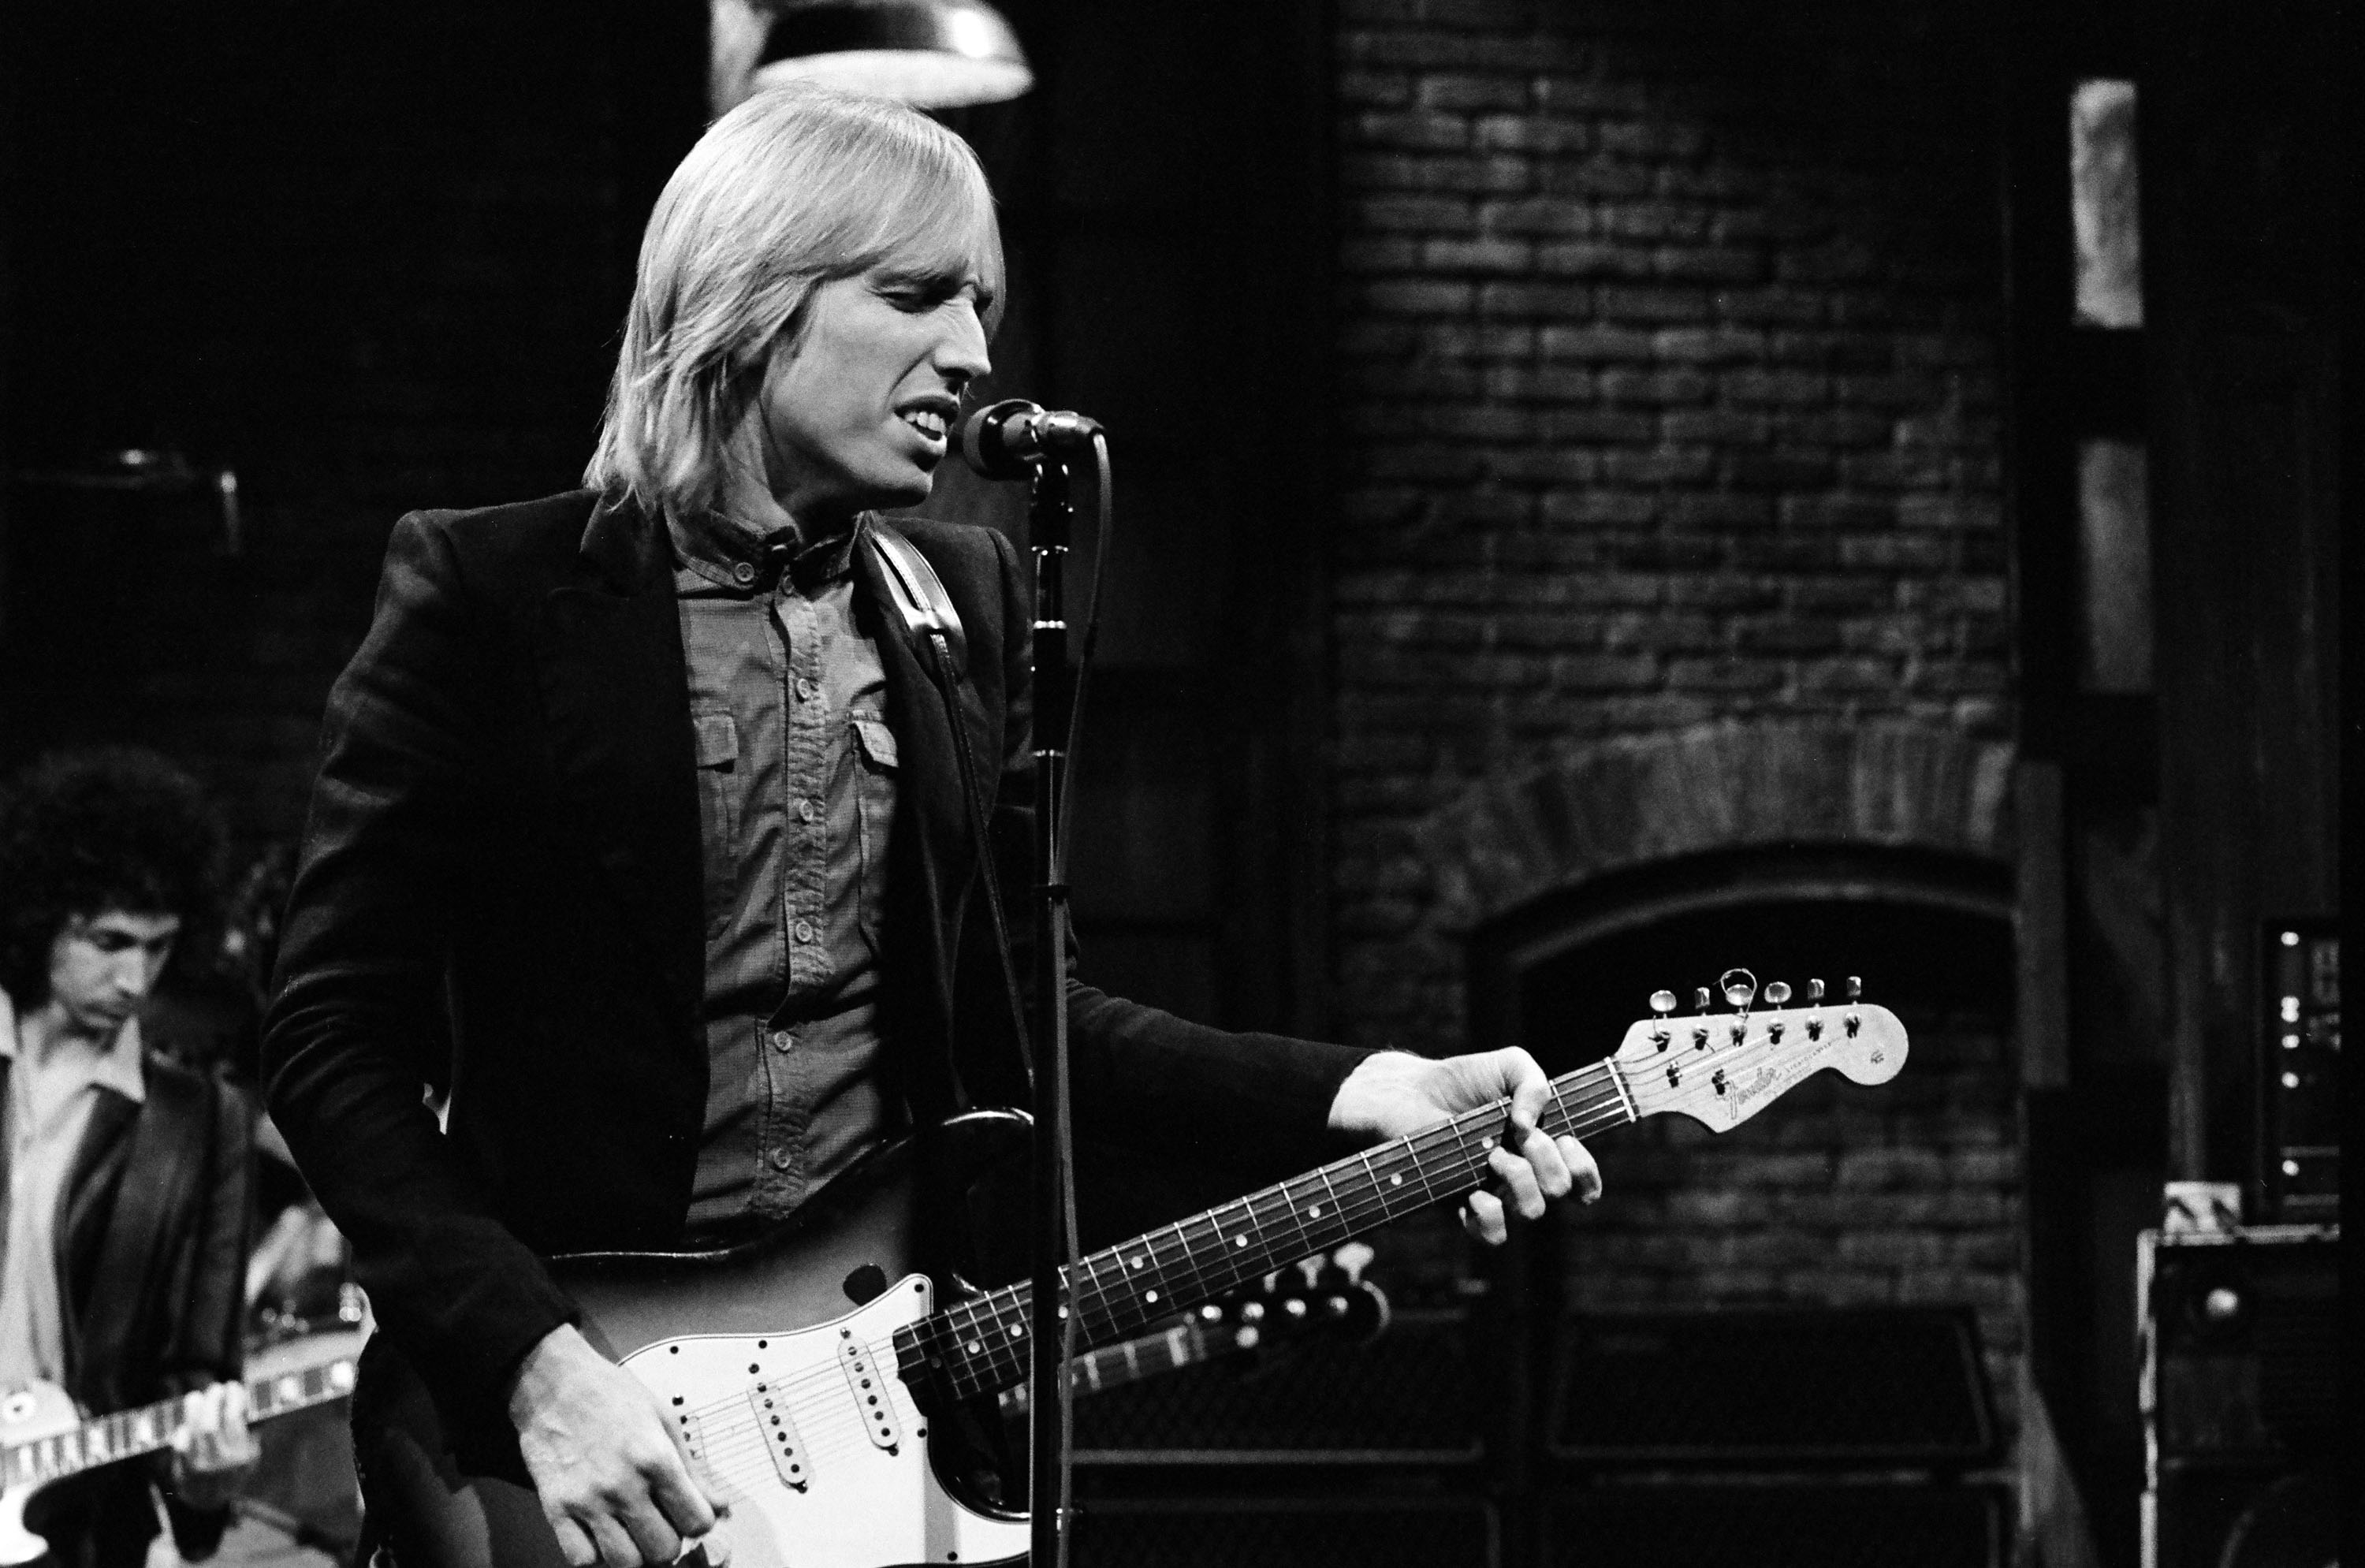 A black and white picture of Tom Petty playing guitar and singing into a microphone on 'SNL.'